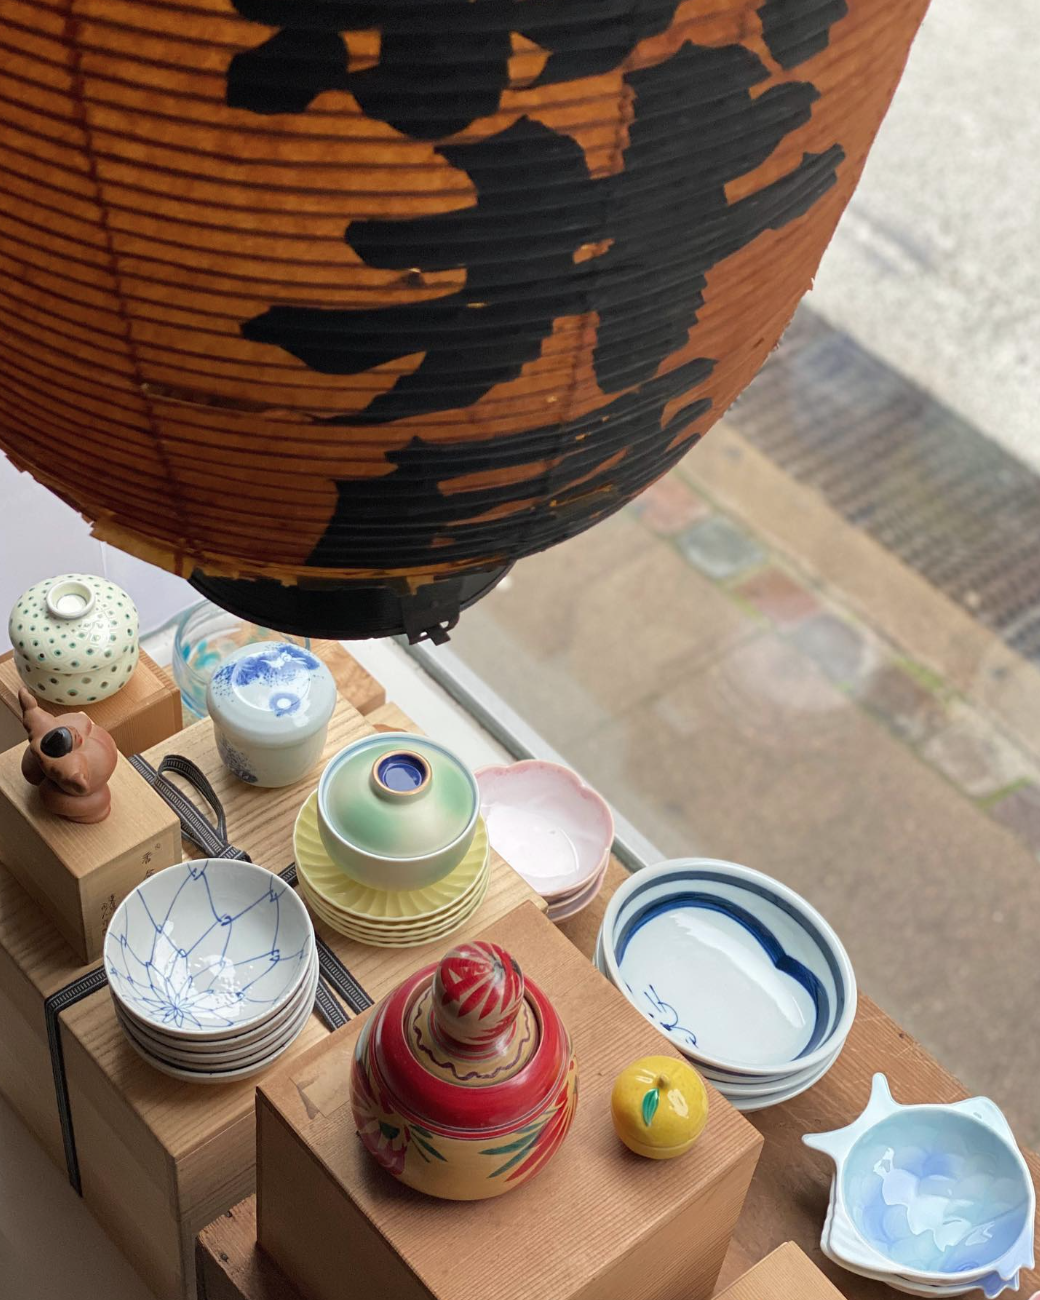 the trio visit tokyo, once or twice each year sourcing antiques and ceramics an 10